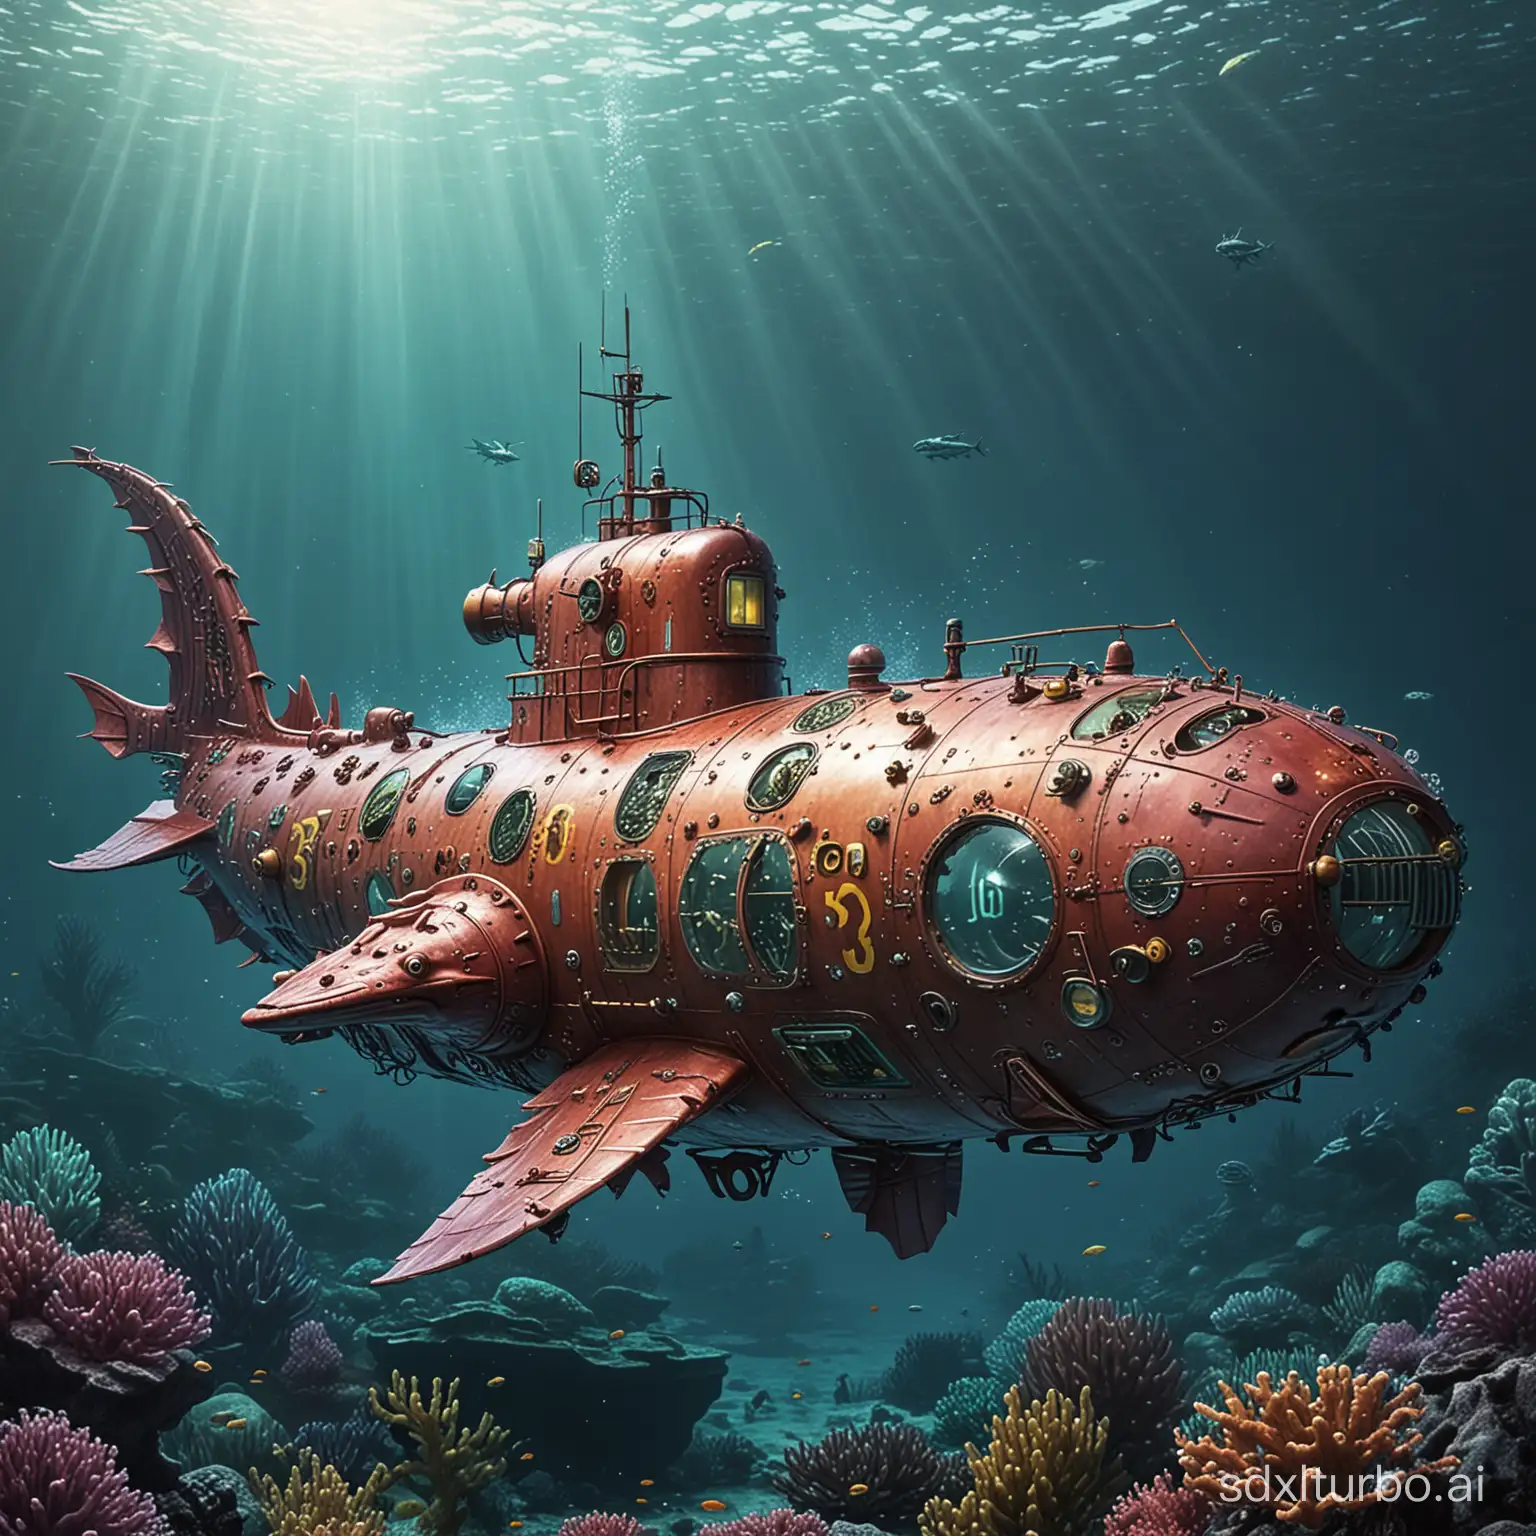 Submarine-Exploring-a-Mystical-Underwater-World-with-Dragonlike-Creatures